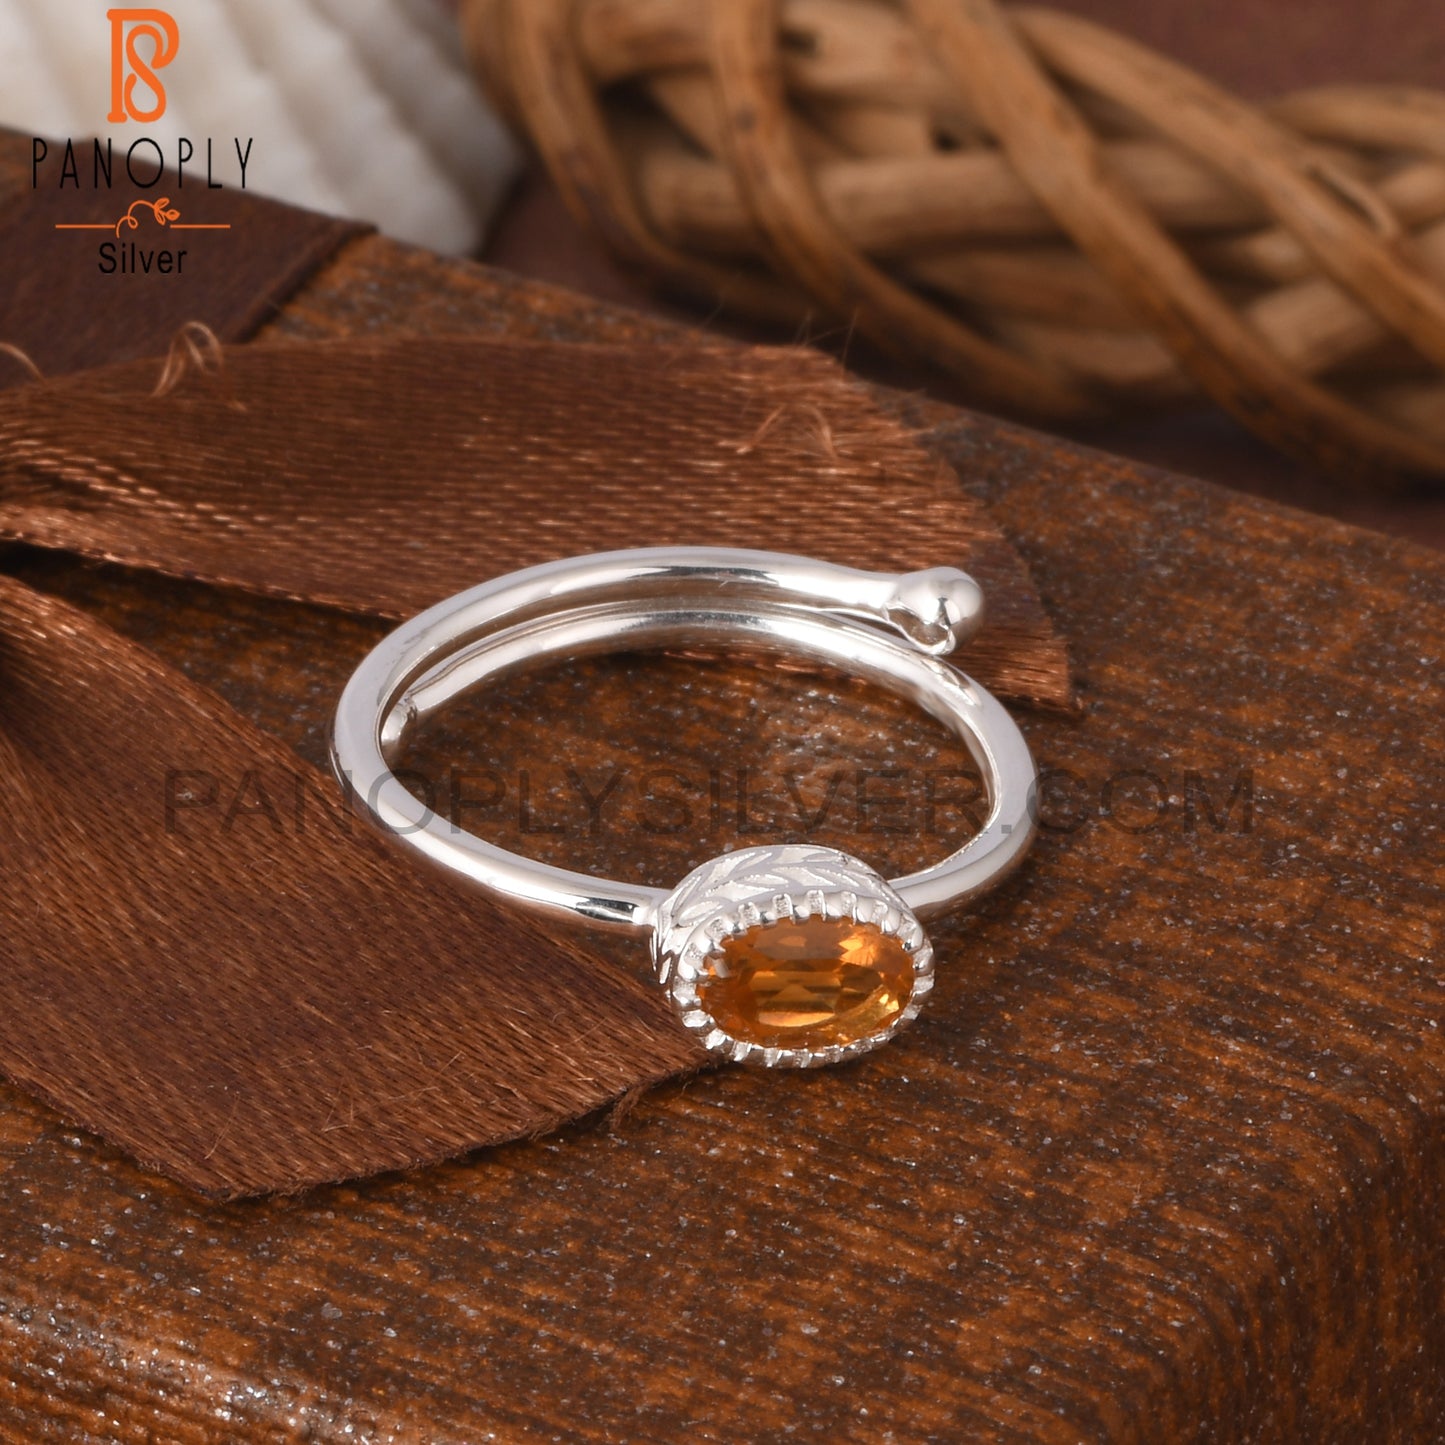 Citrine Oval Shape 925 Sterling Silver Stackable Ring